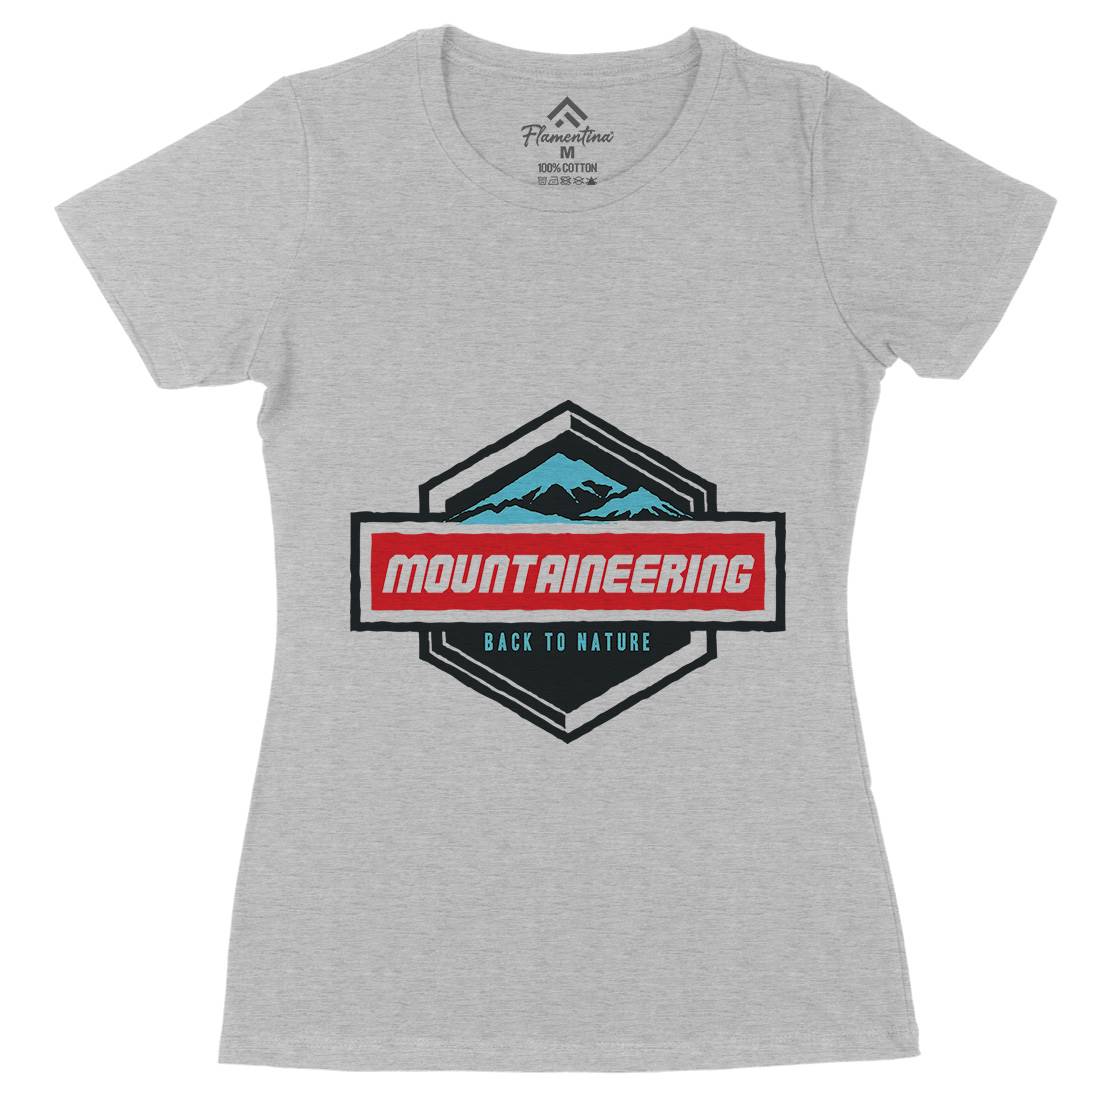 Mountaineering Womens Organic Crew Neck T-Shirt Nature A350